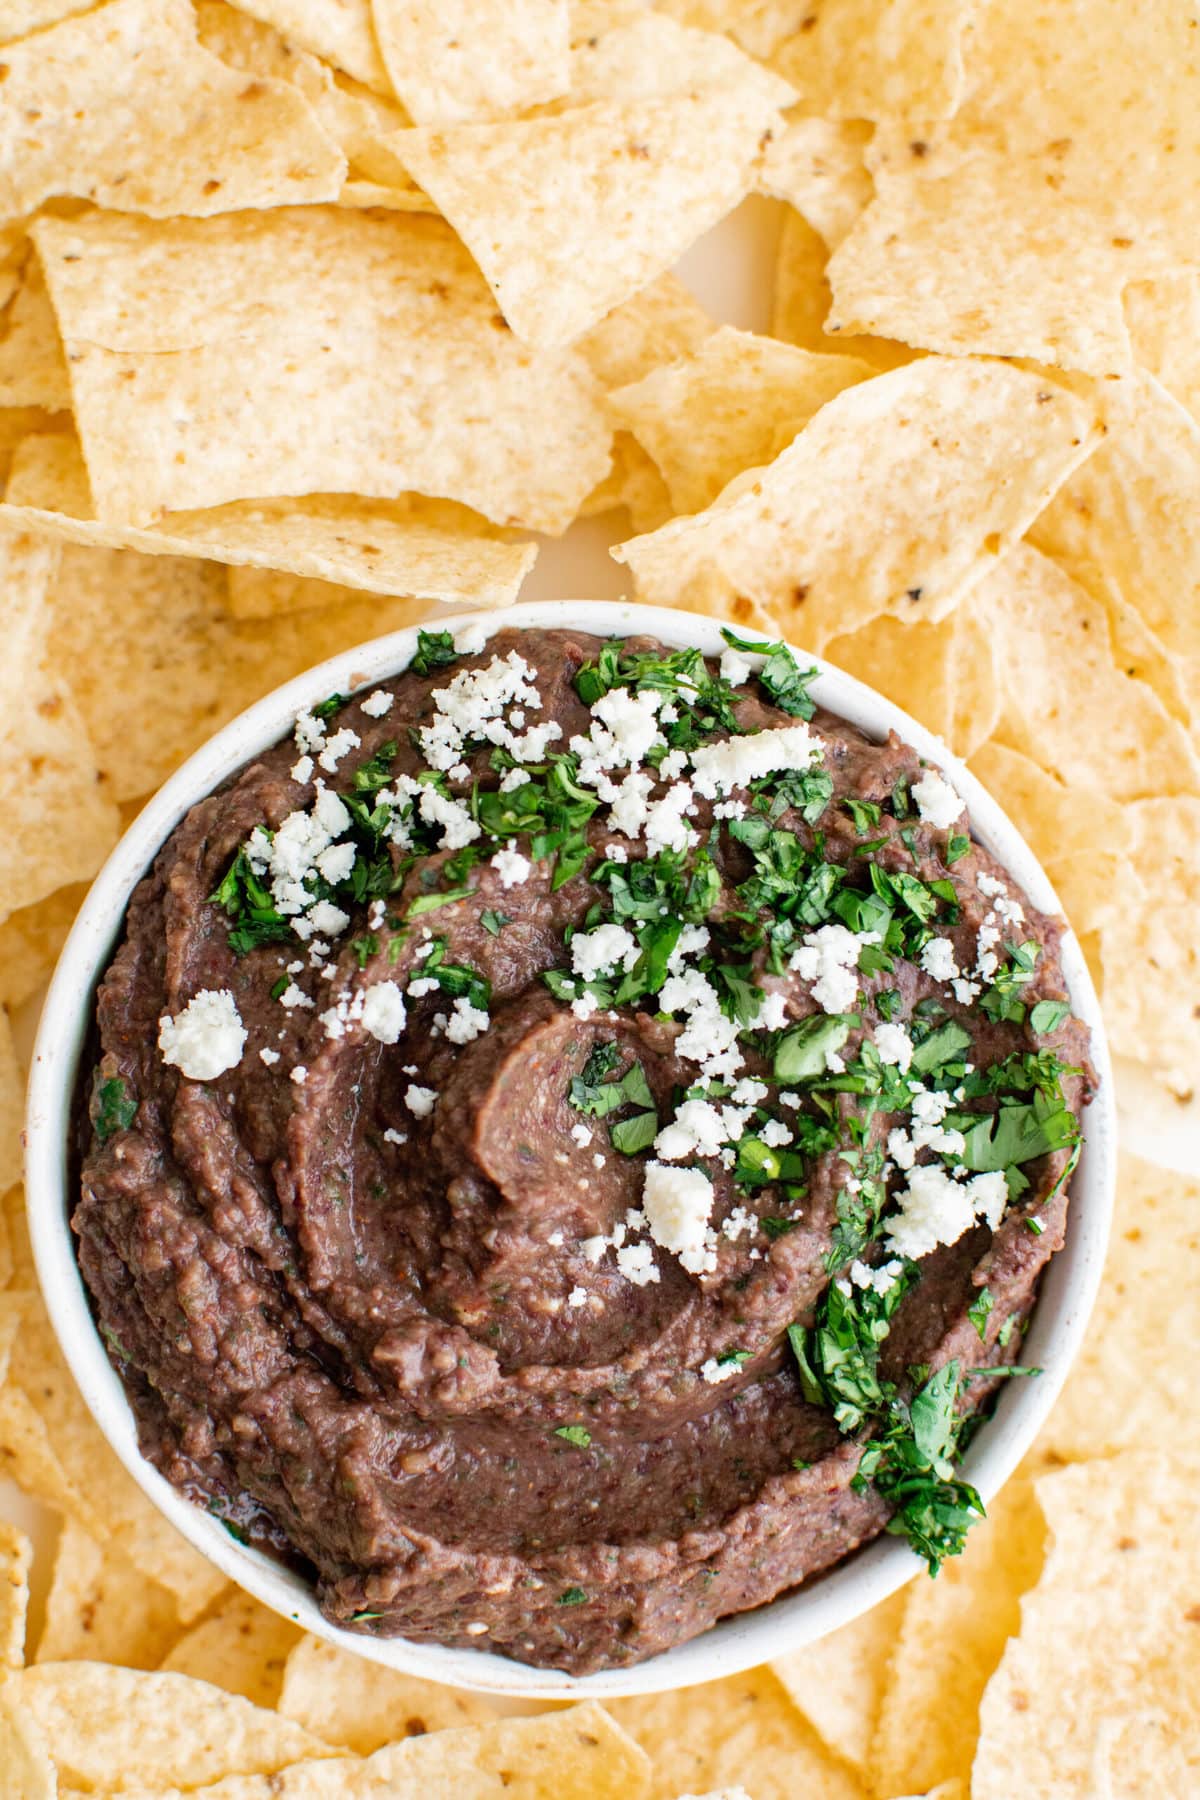 Tortilla chips, black bean dip with cotija cheese and cilantro garnish in a white bowl